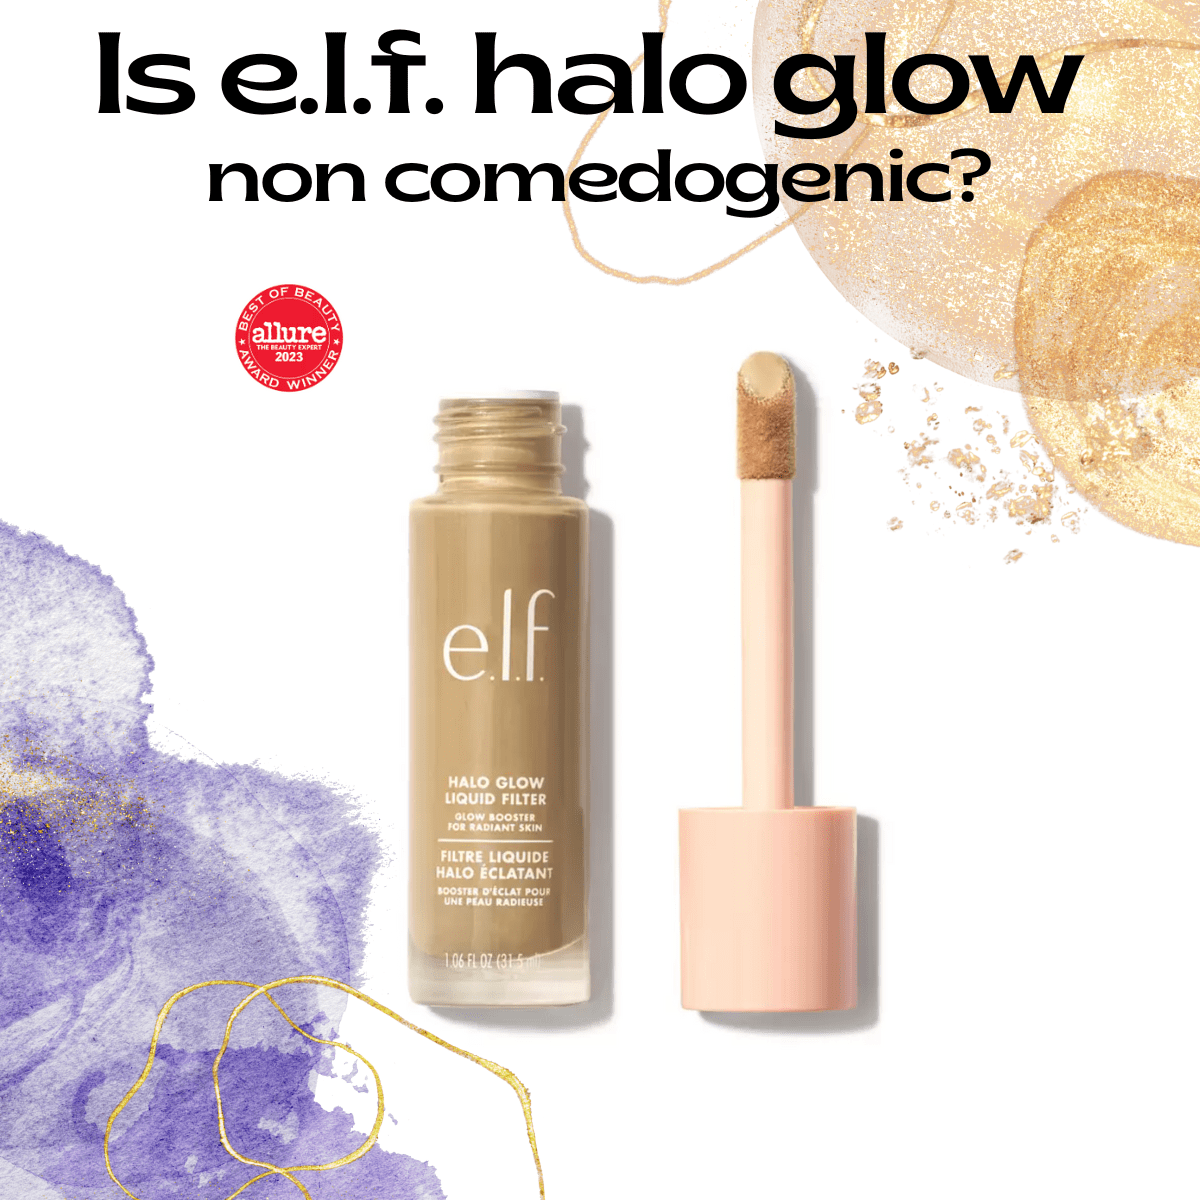 Is Elf Halo Glow Non Comedogenic? Here Is What You Need To Know.